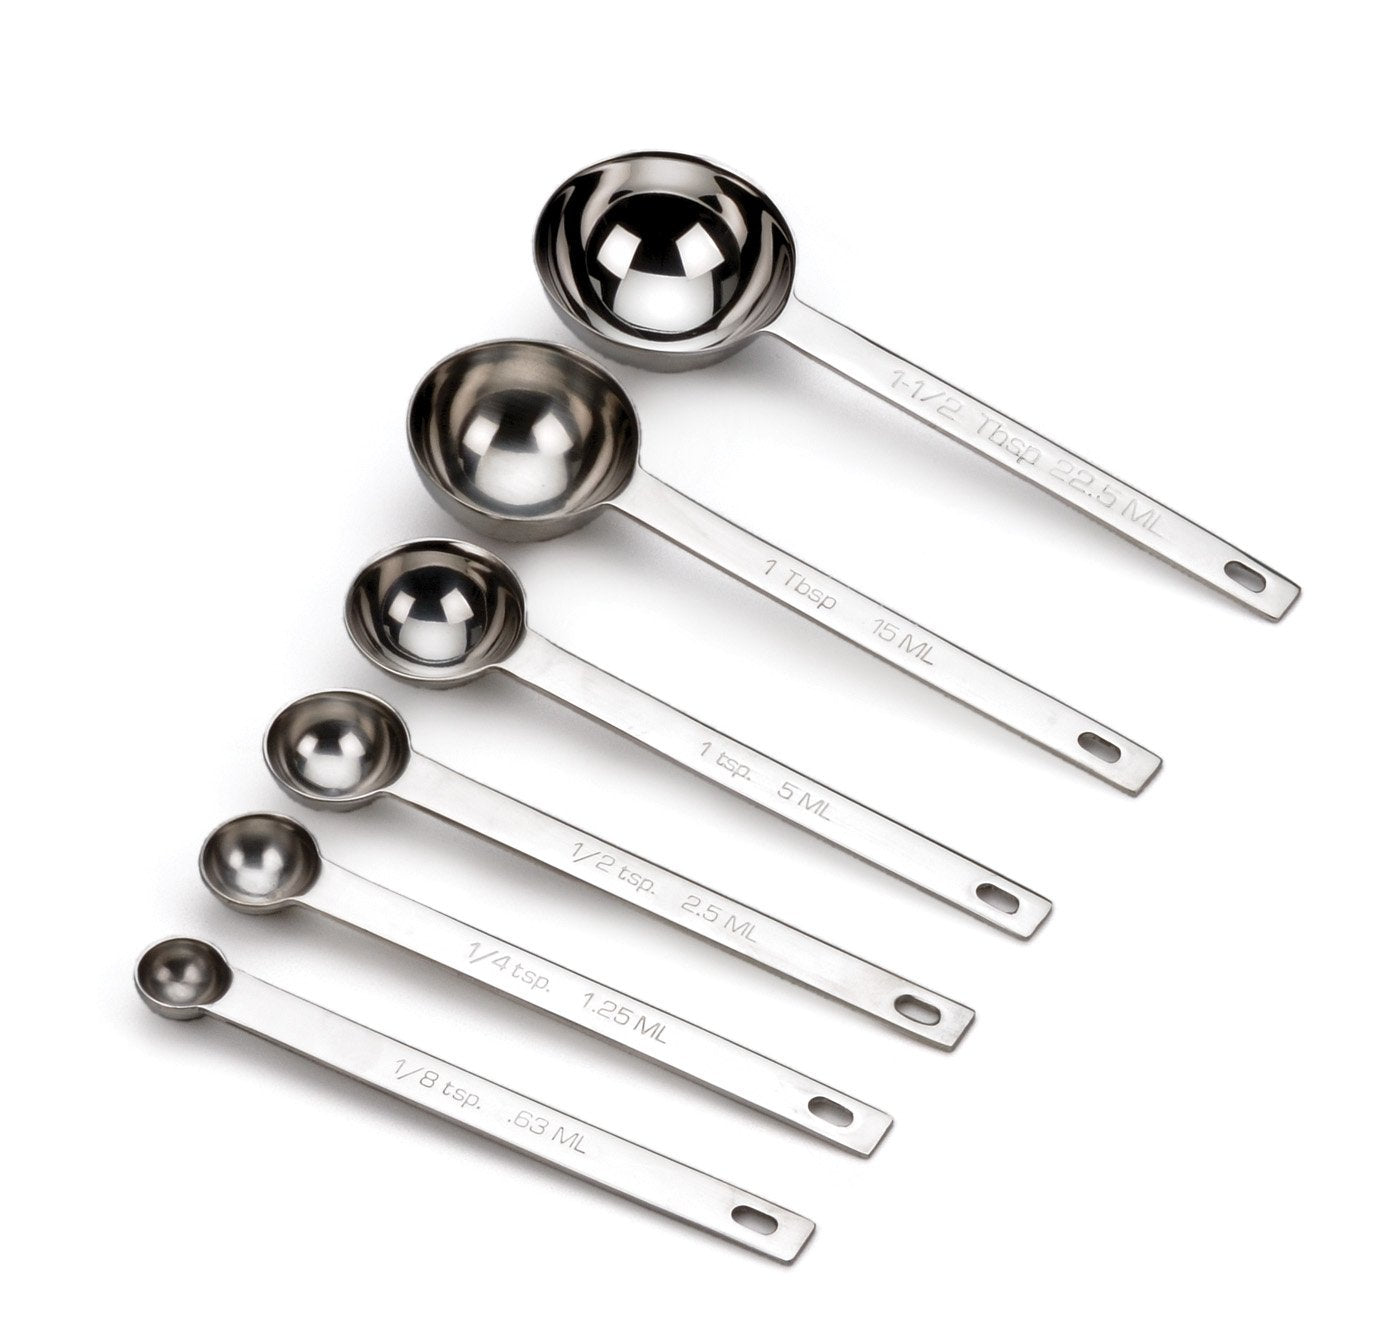 RSVP Measuring Spoons, Set of 6 Stainless